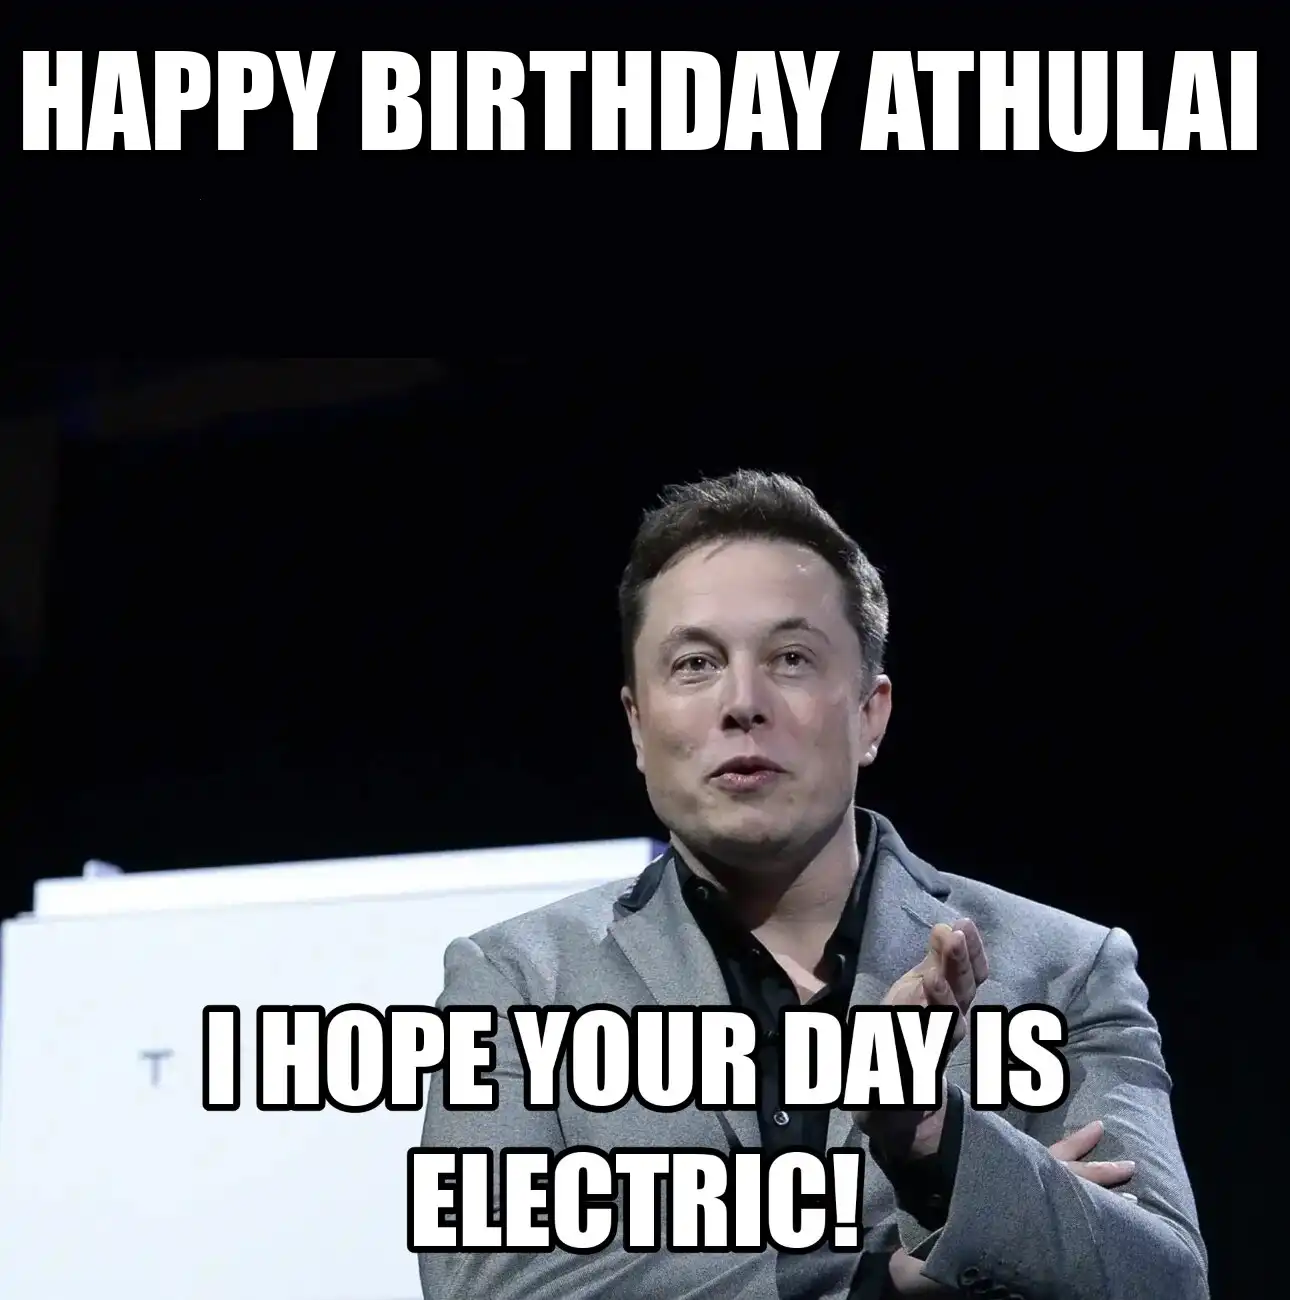 Happy Birthday Athulai I Hope Your Day Is Electric Meme